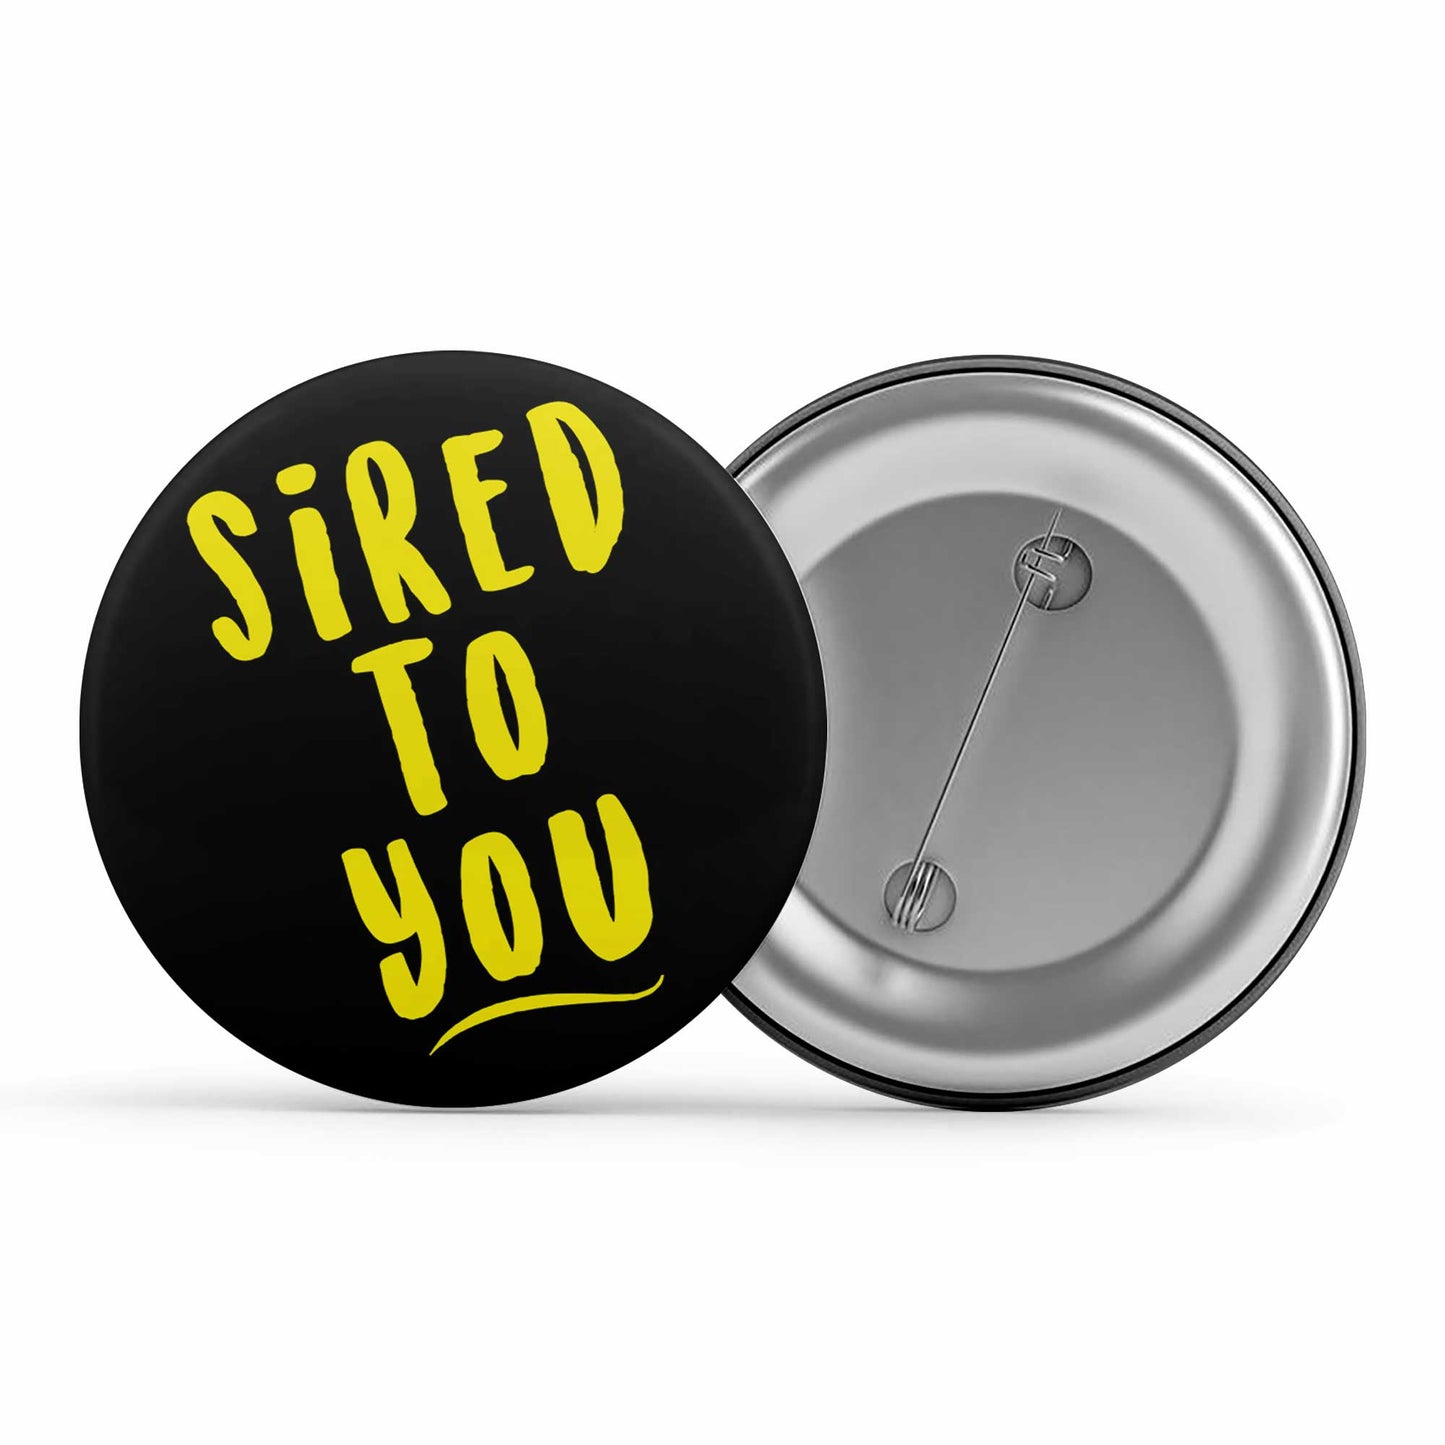 The Vampire Diaries Badge - Sired To You